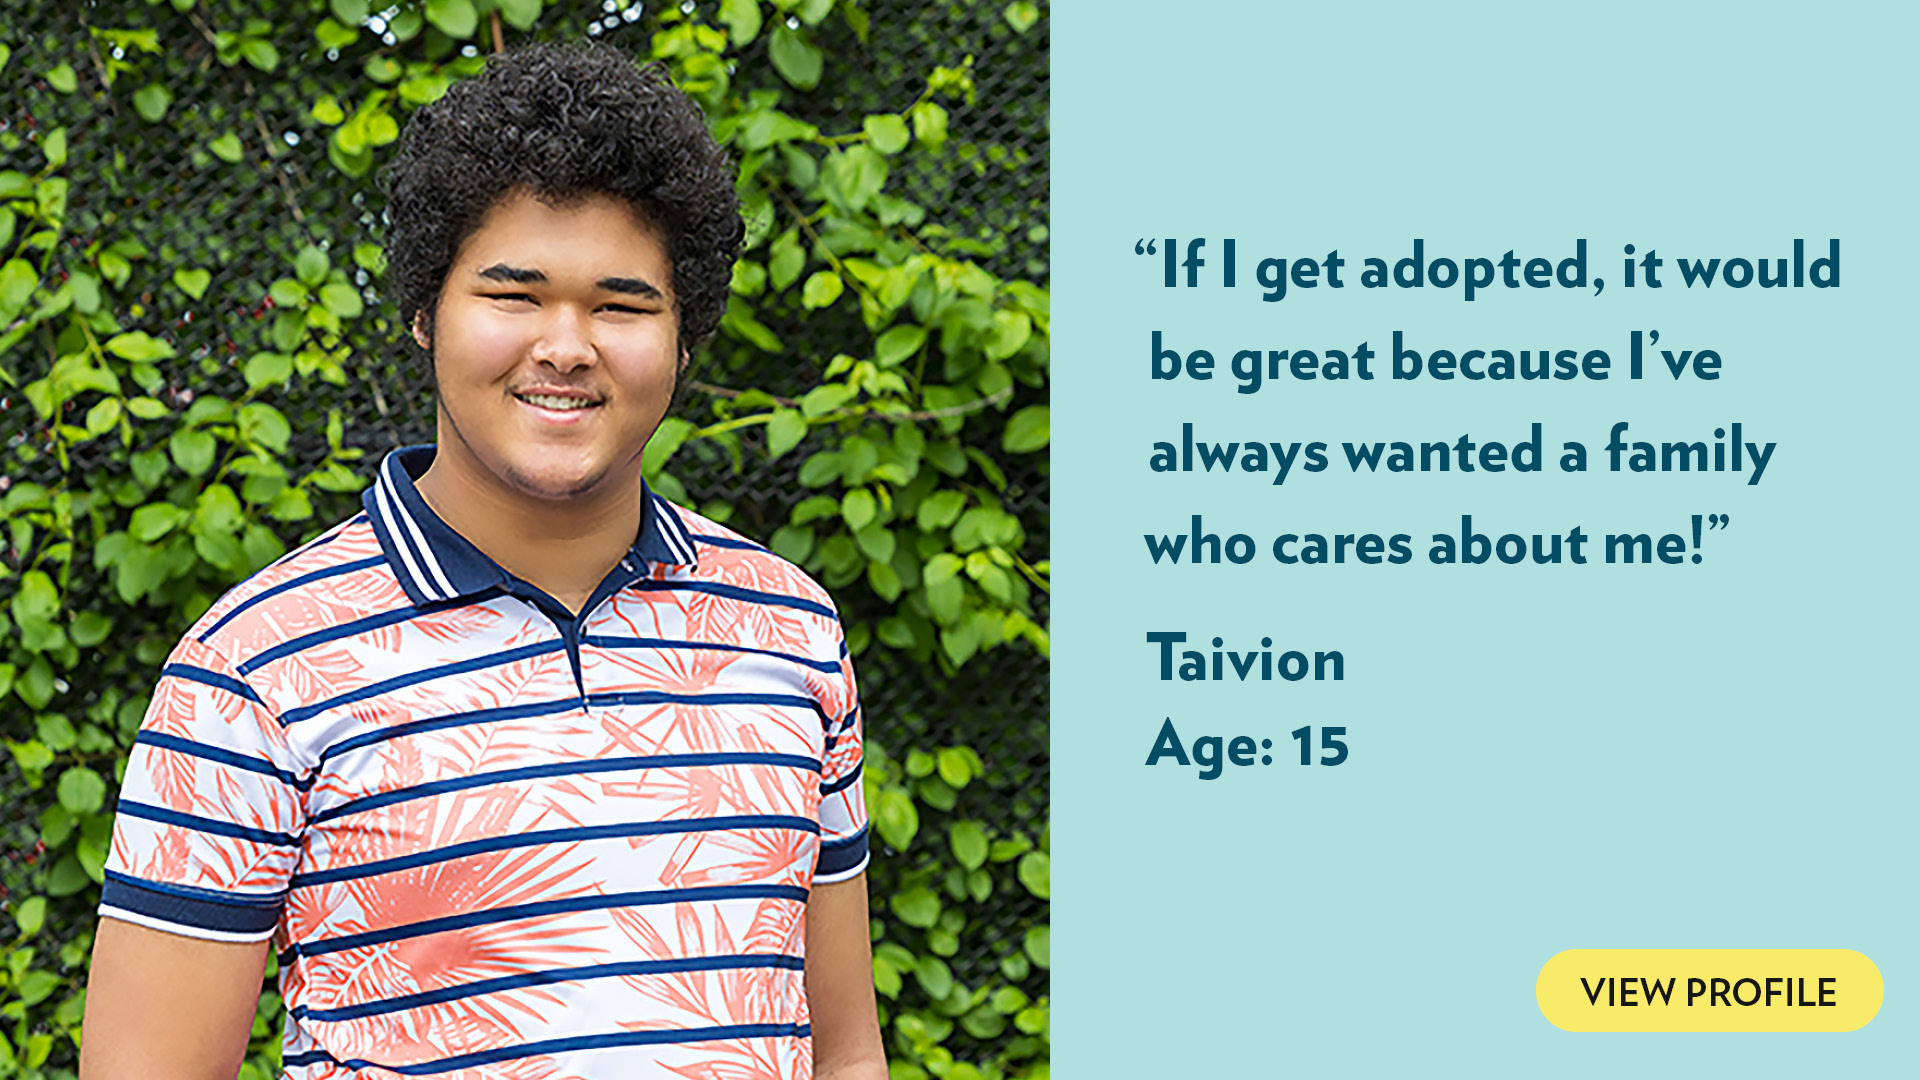 If I get adopted, it would be great because I’ve always wanted a family who cares about me! Taivion, age 15. View profile.